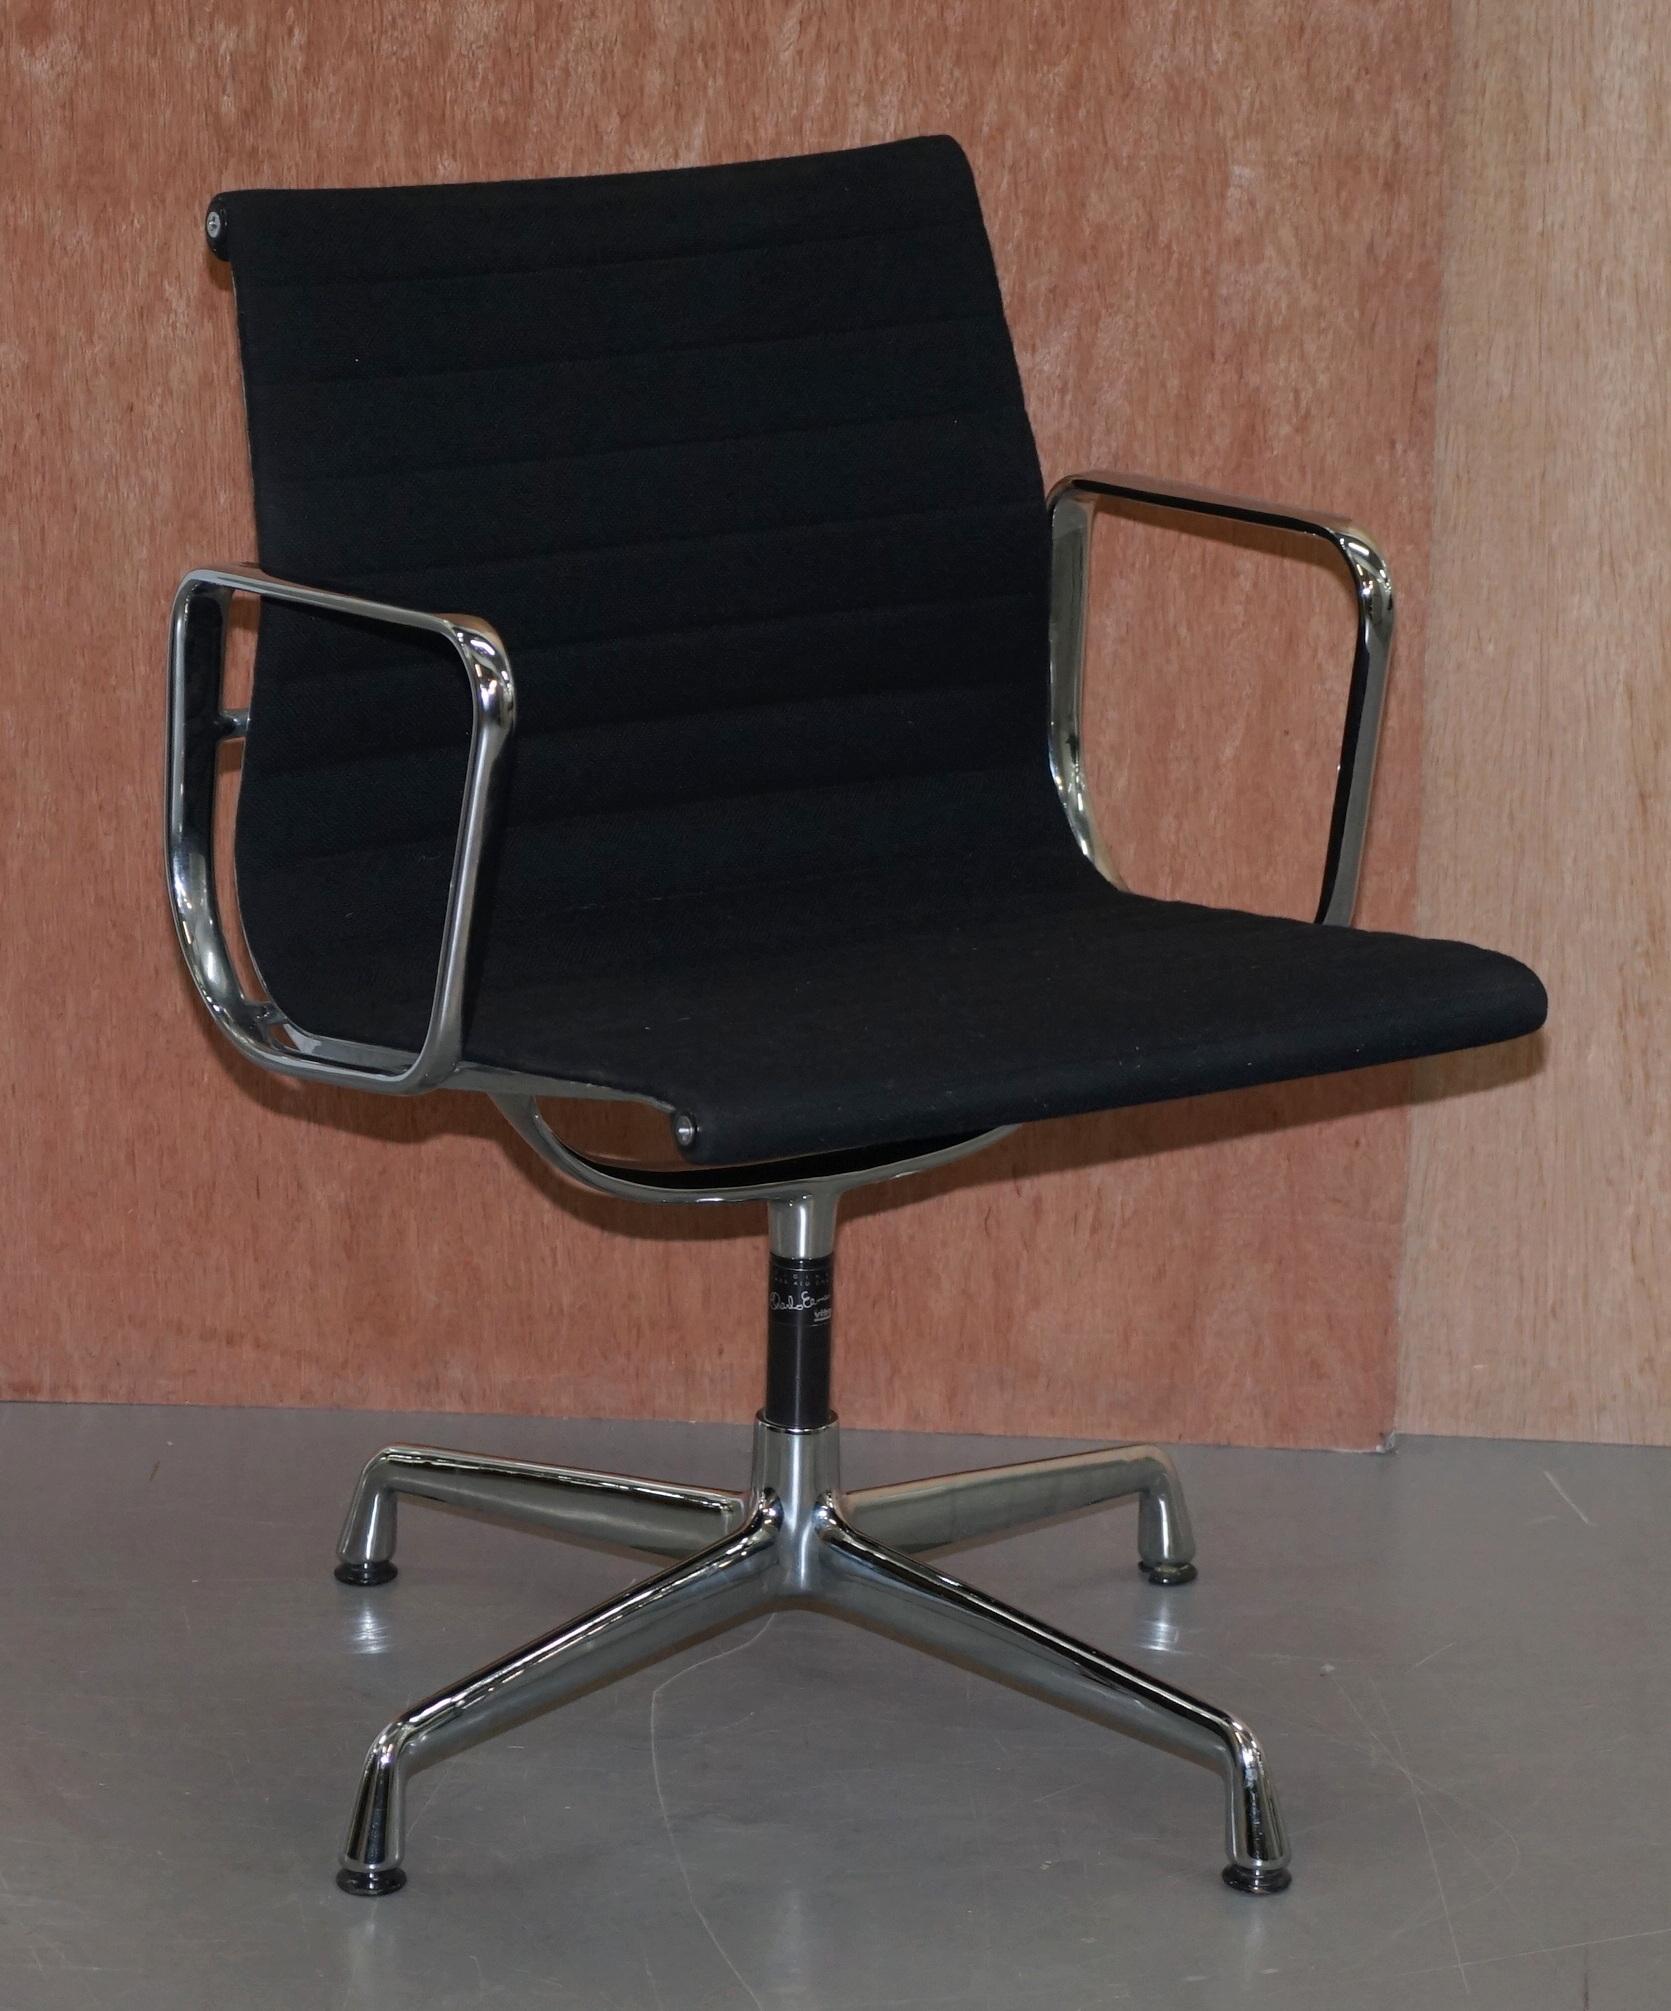 We are delighted to offer for sale one of two Vitra Eames EA 108 Hopsak office chairs RRP £1920 each

To confirm this sale is for one chair with the option to buy two

Charles and Ray Eames created an icon of the twentieth century with their